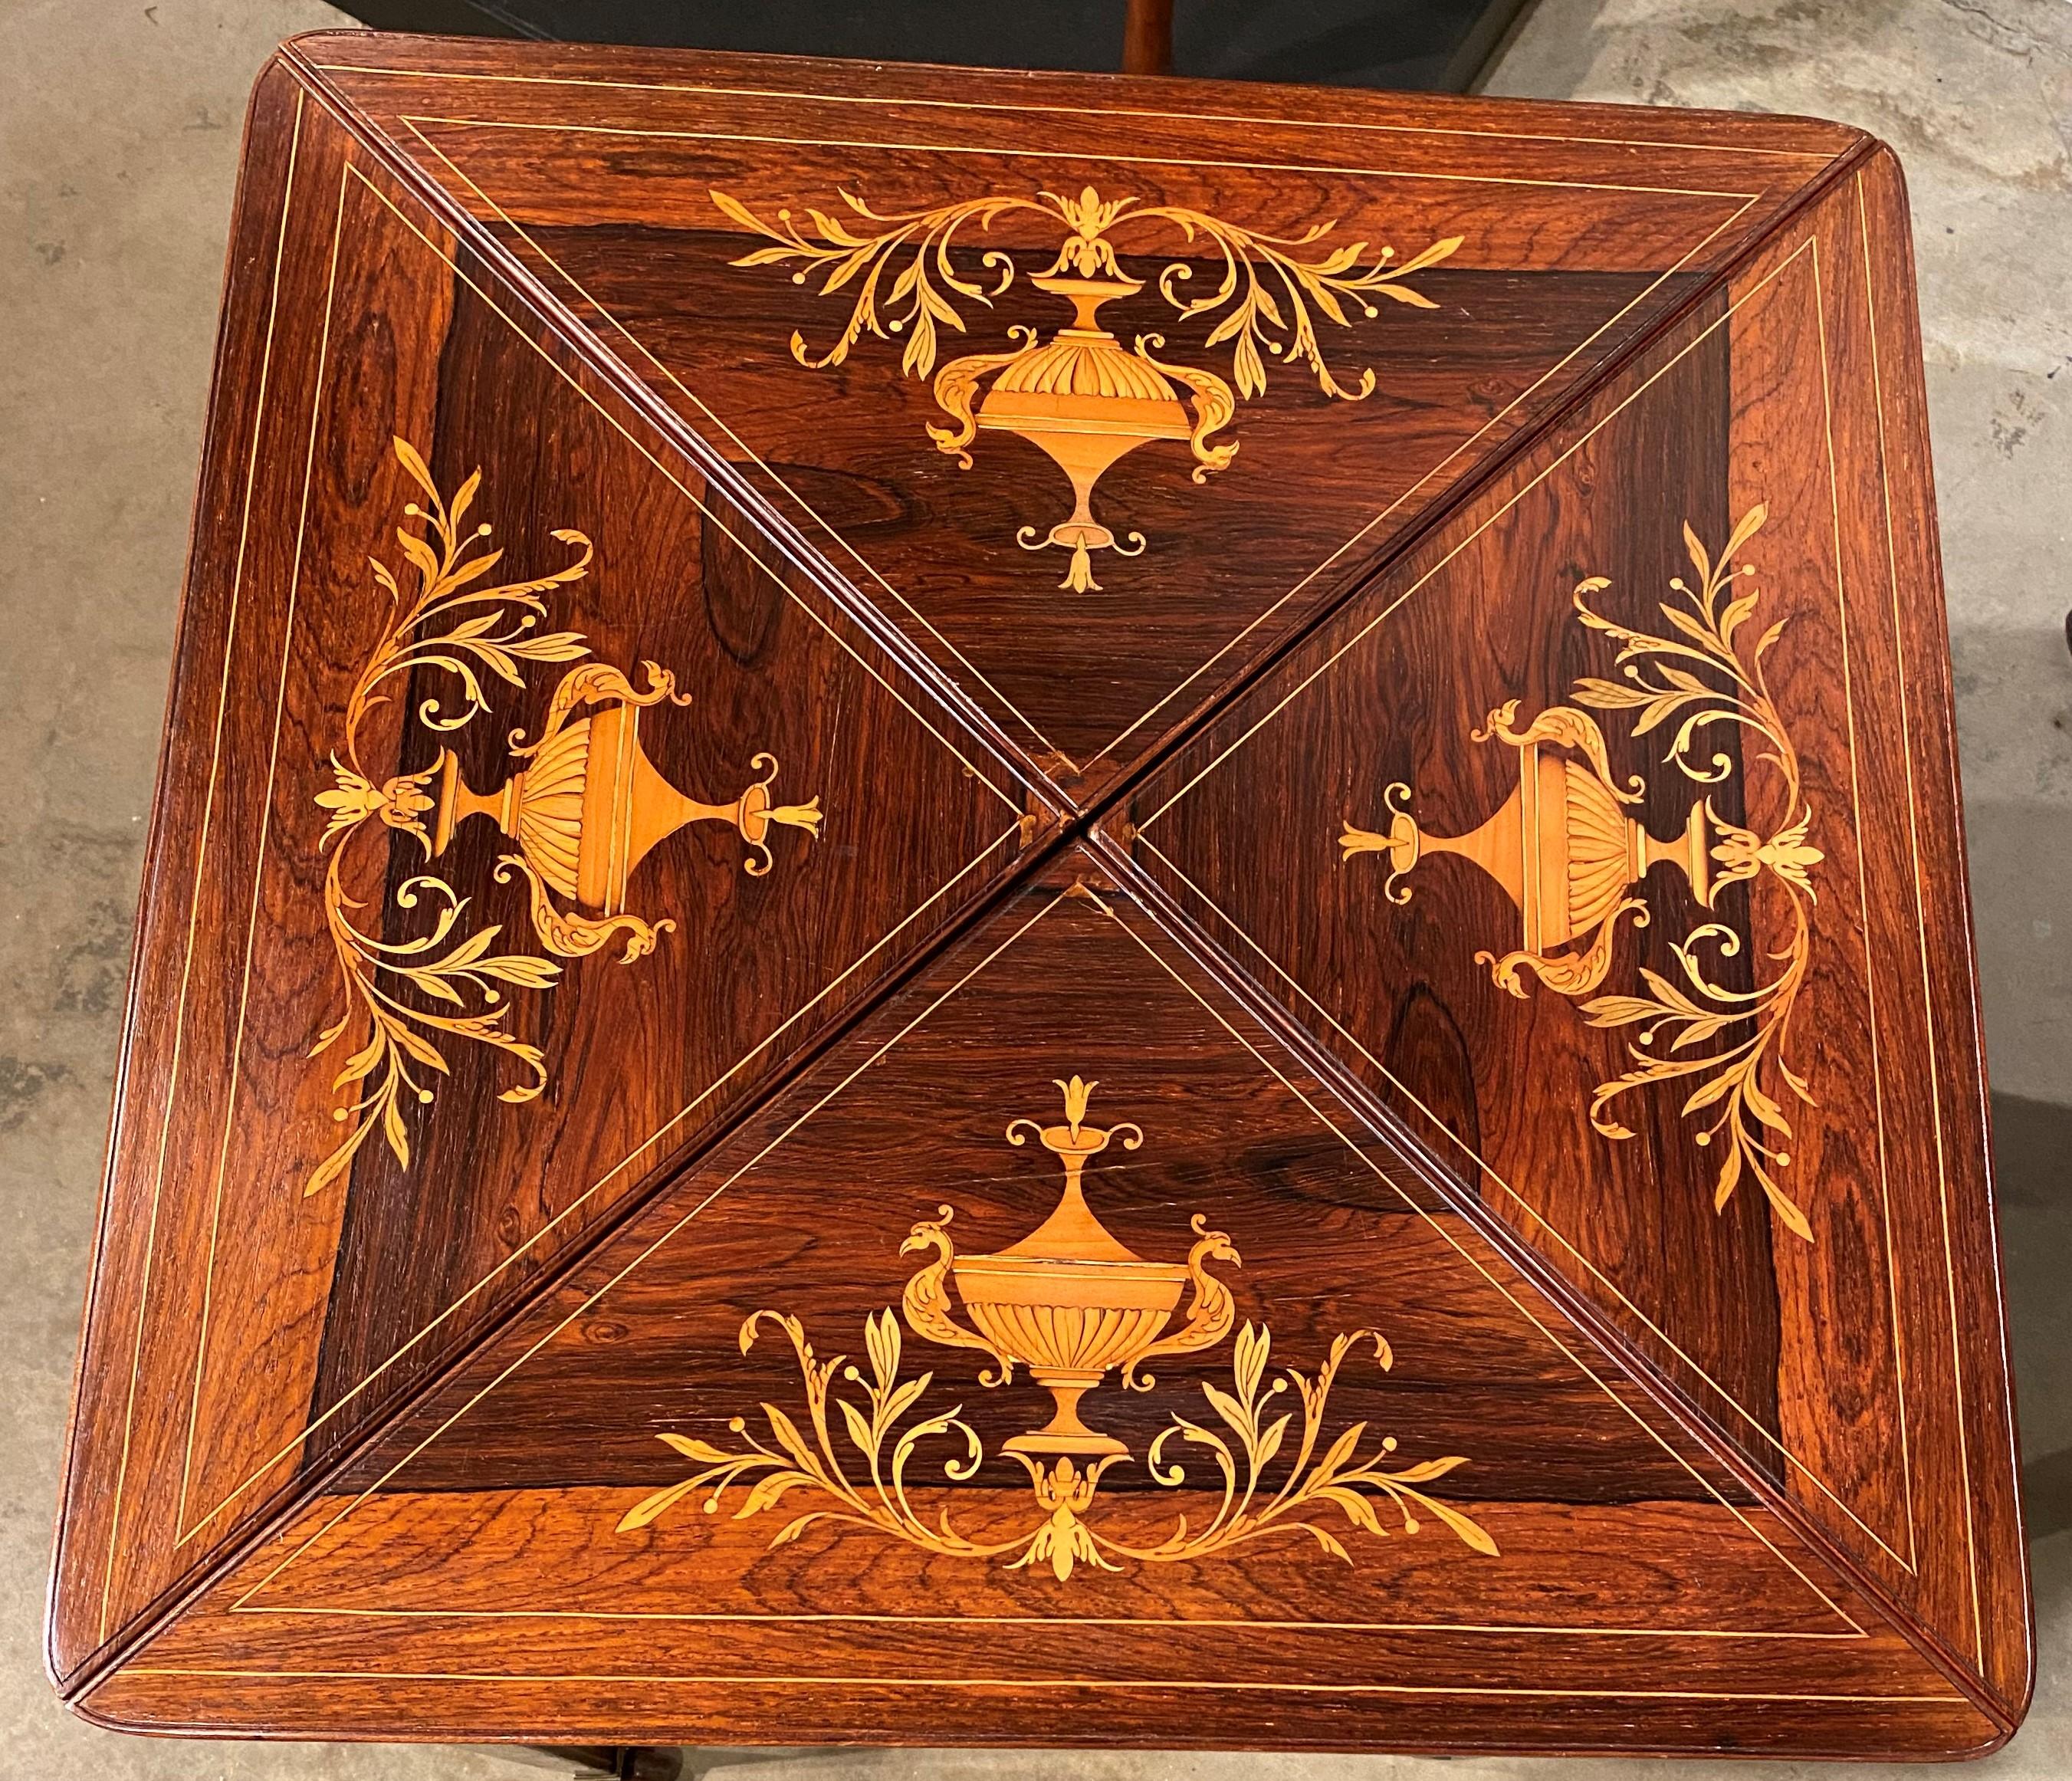 A wonderful example of an English handkerchief gaming table with exceptional satinwood scrolled inlay on each of the top four panels. Once the top is rotated 45 degrees, each top triangle panel can be folded open to reveal a green felt-lined gaming